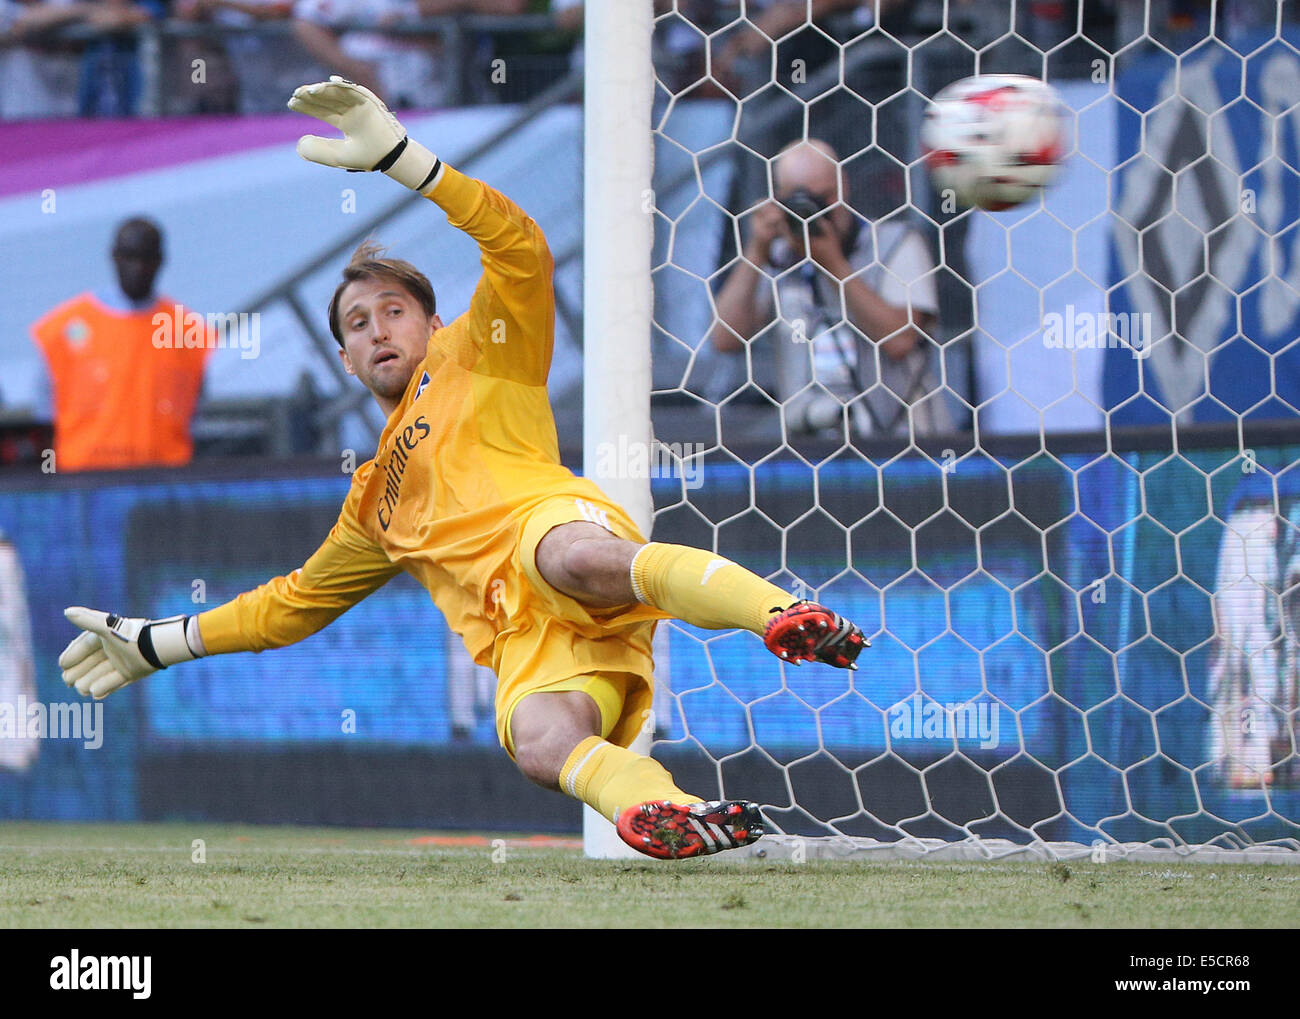 Hamburg, Germany. 26th July, 2014. Hamburg's goal keeper Rene Alder is not able to save a penalty during the Telekom Cup soccer match between Hamburger SV and VfL Wolfsburg in the Imtech Arena in Hamburg, Germany, 26 July 2014. Photo: Axel Heimken/dpa/Alamy Live News Stock Photo